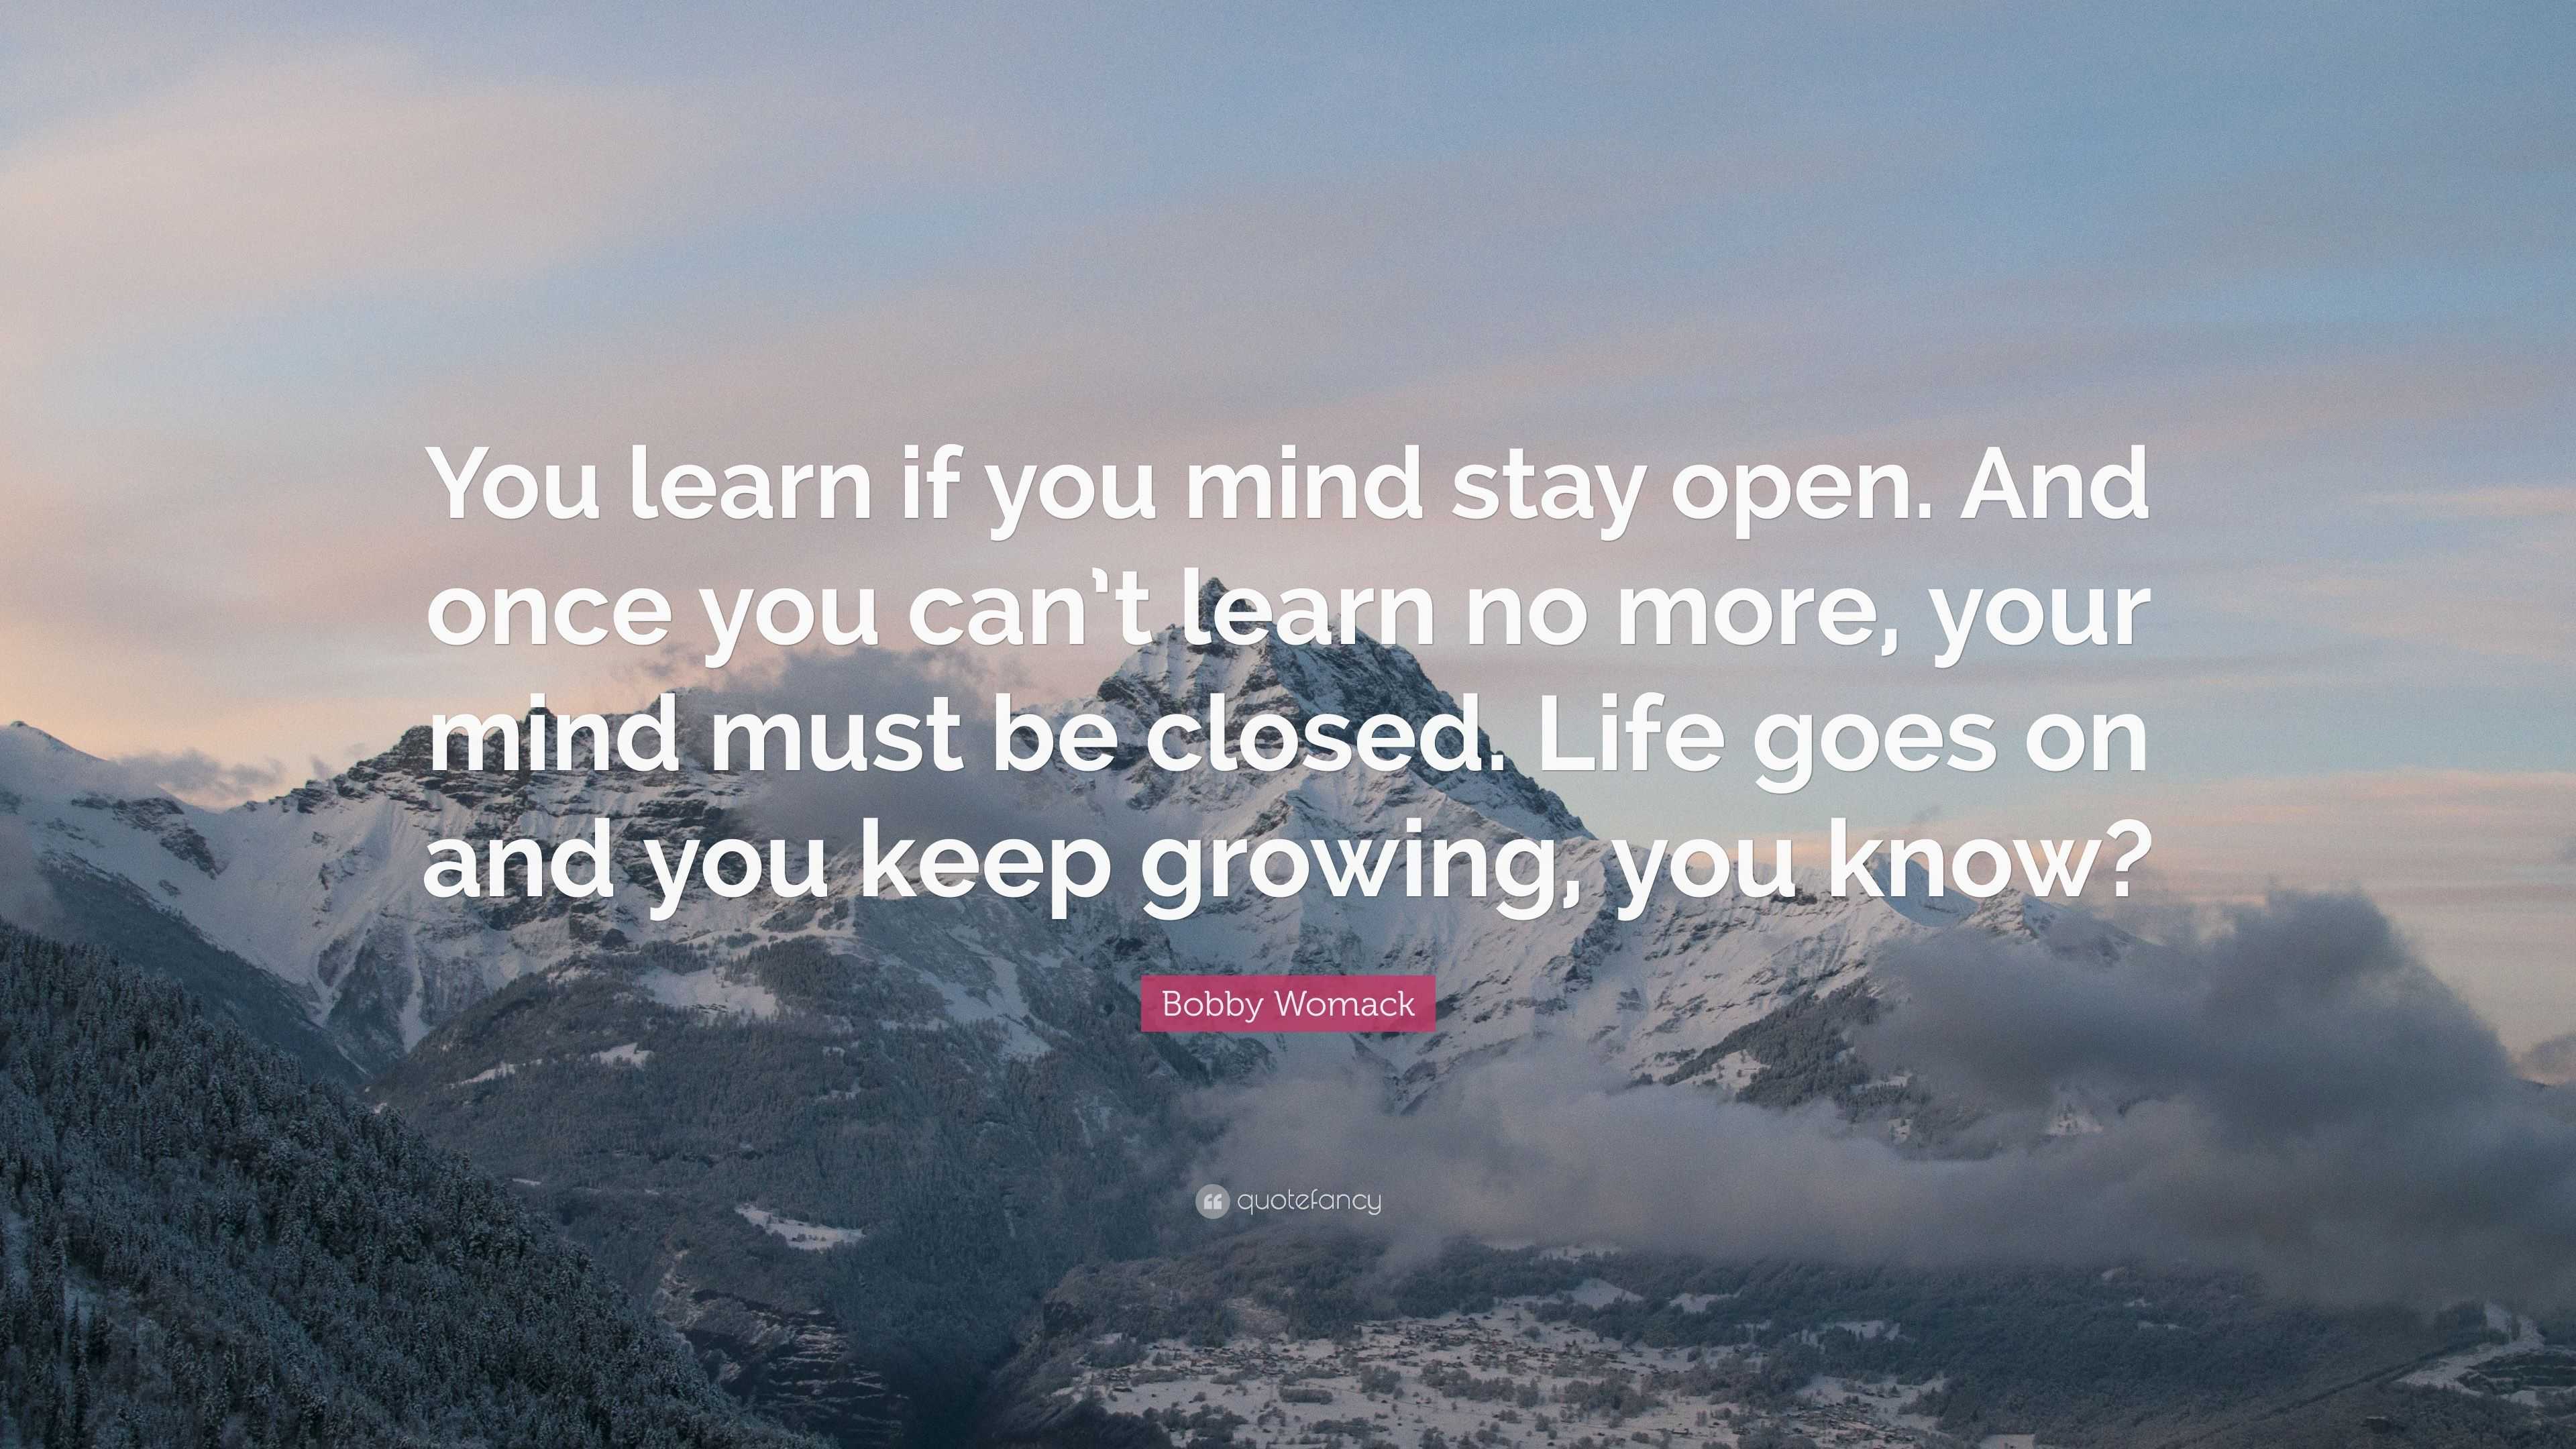 Bobby Womack Quote: “You learn if you mind stay open. And once you can ...